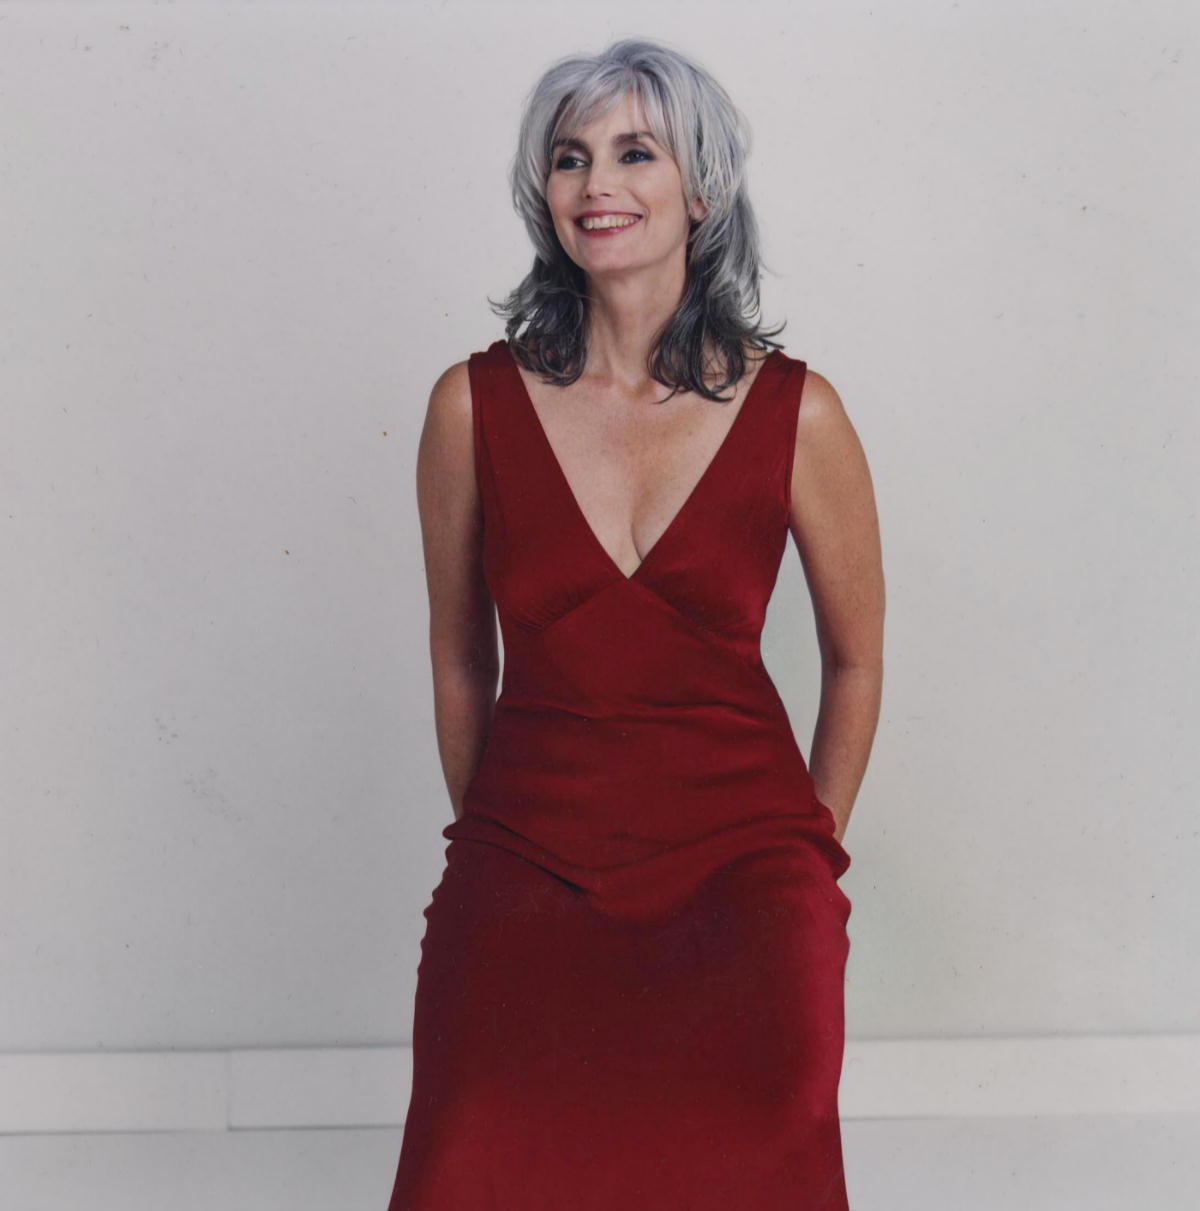 Emmylou Harris is some kind of woman! wallpaper image